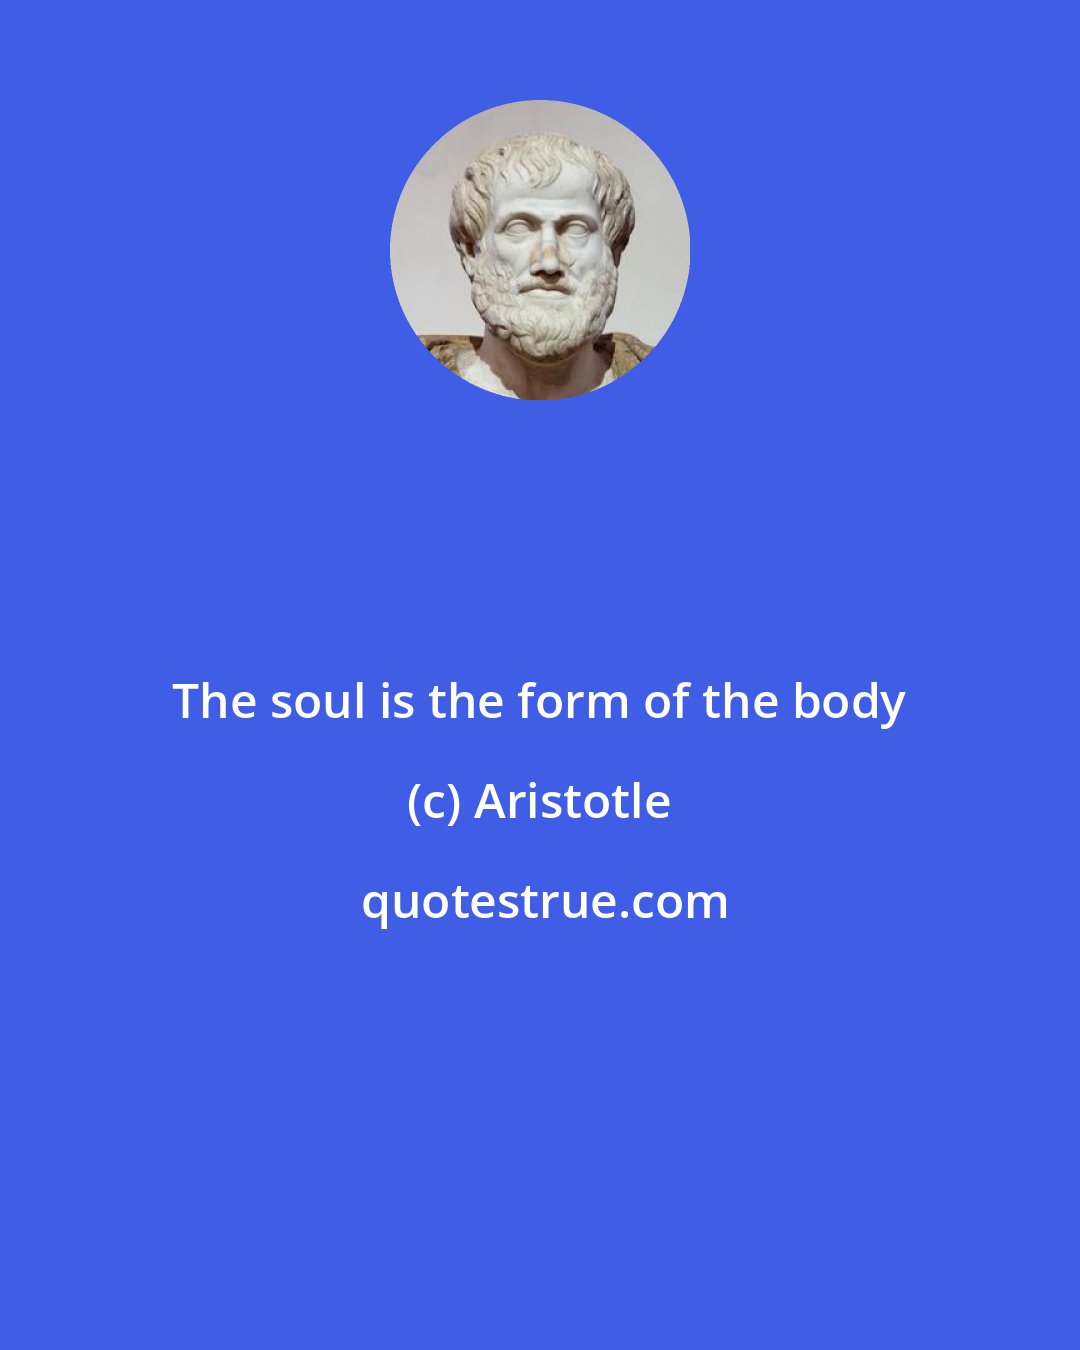 Aristotle: The soul is the form of the body